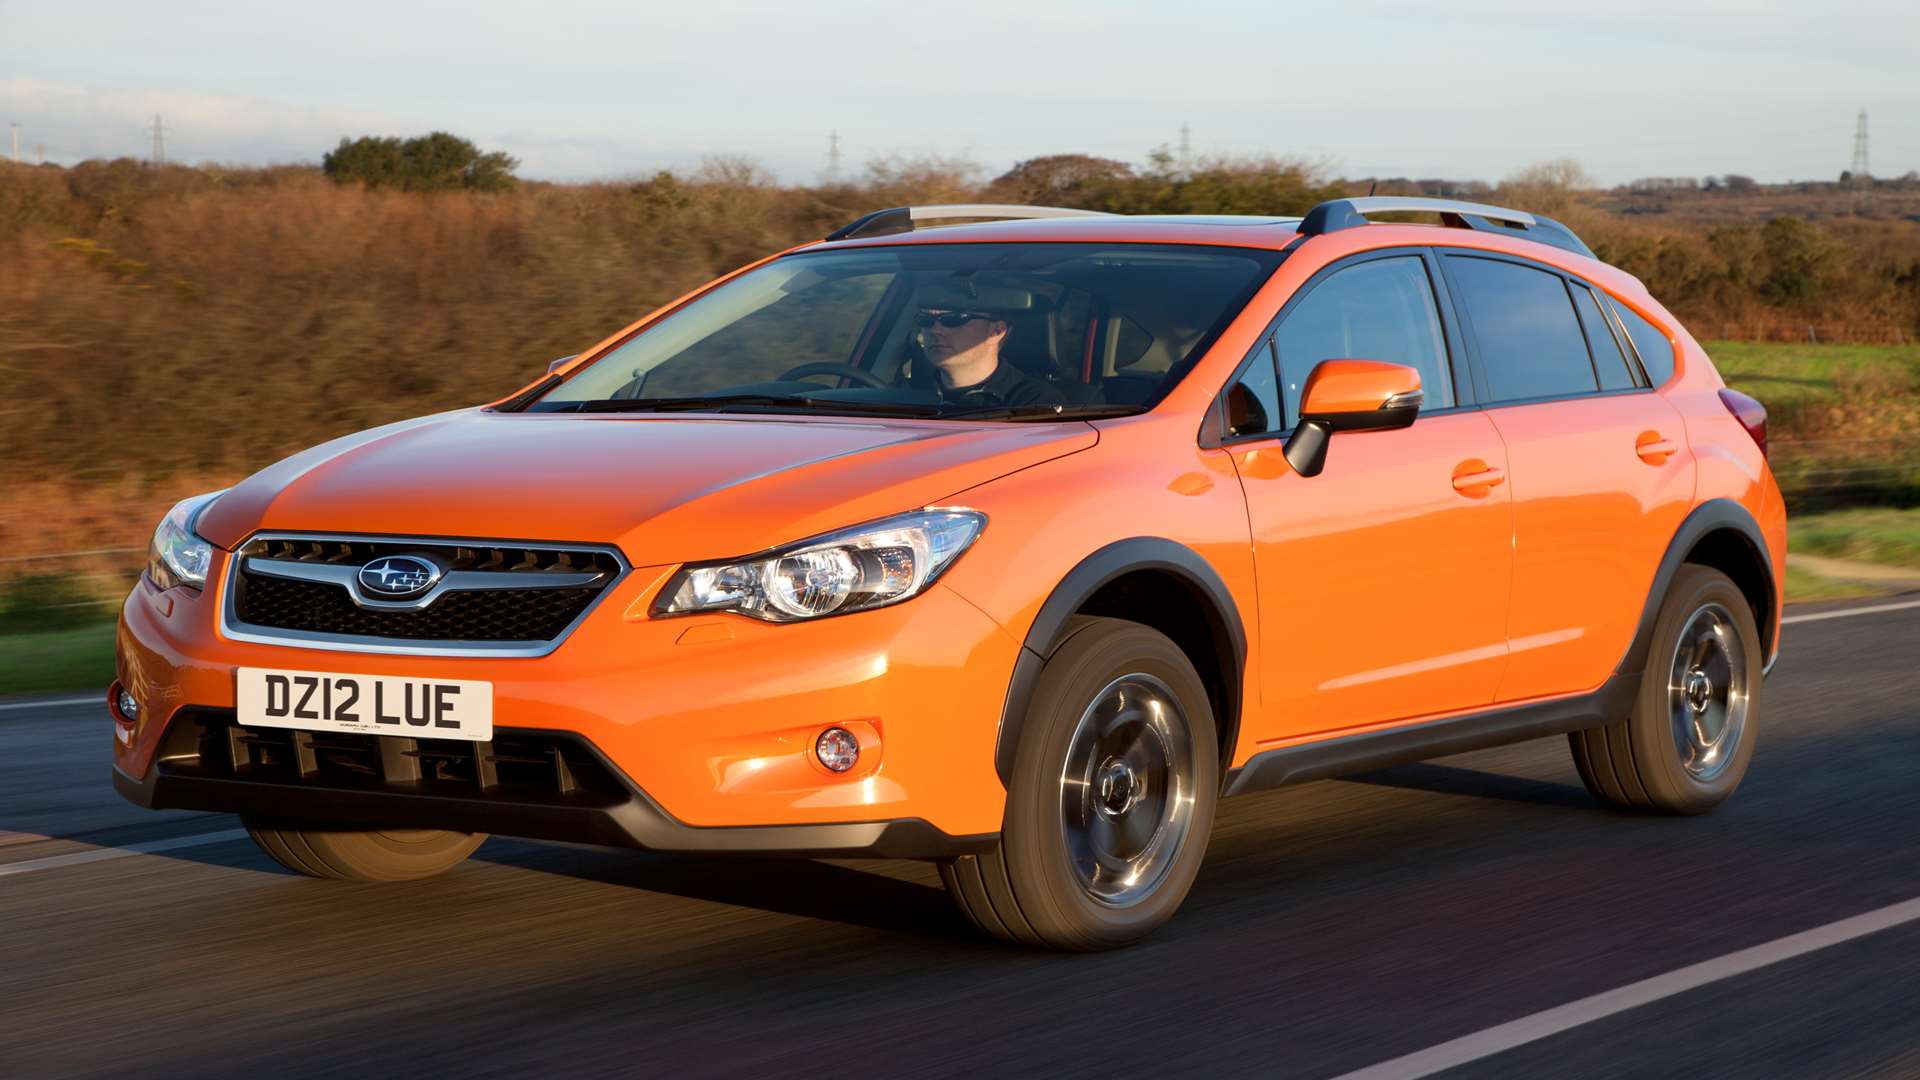 The XV offers full-time all-wheel-drive